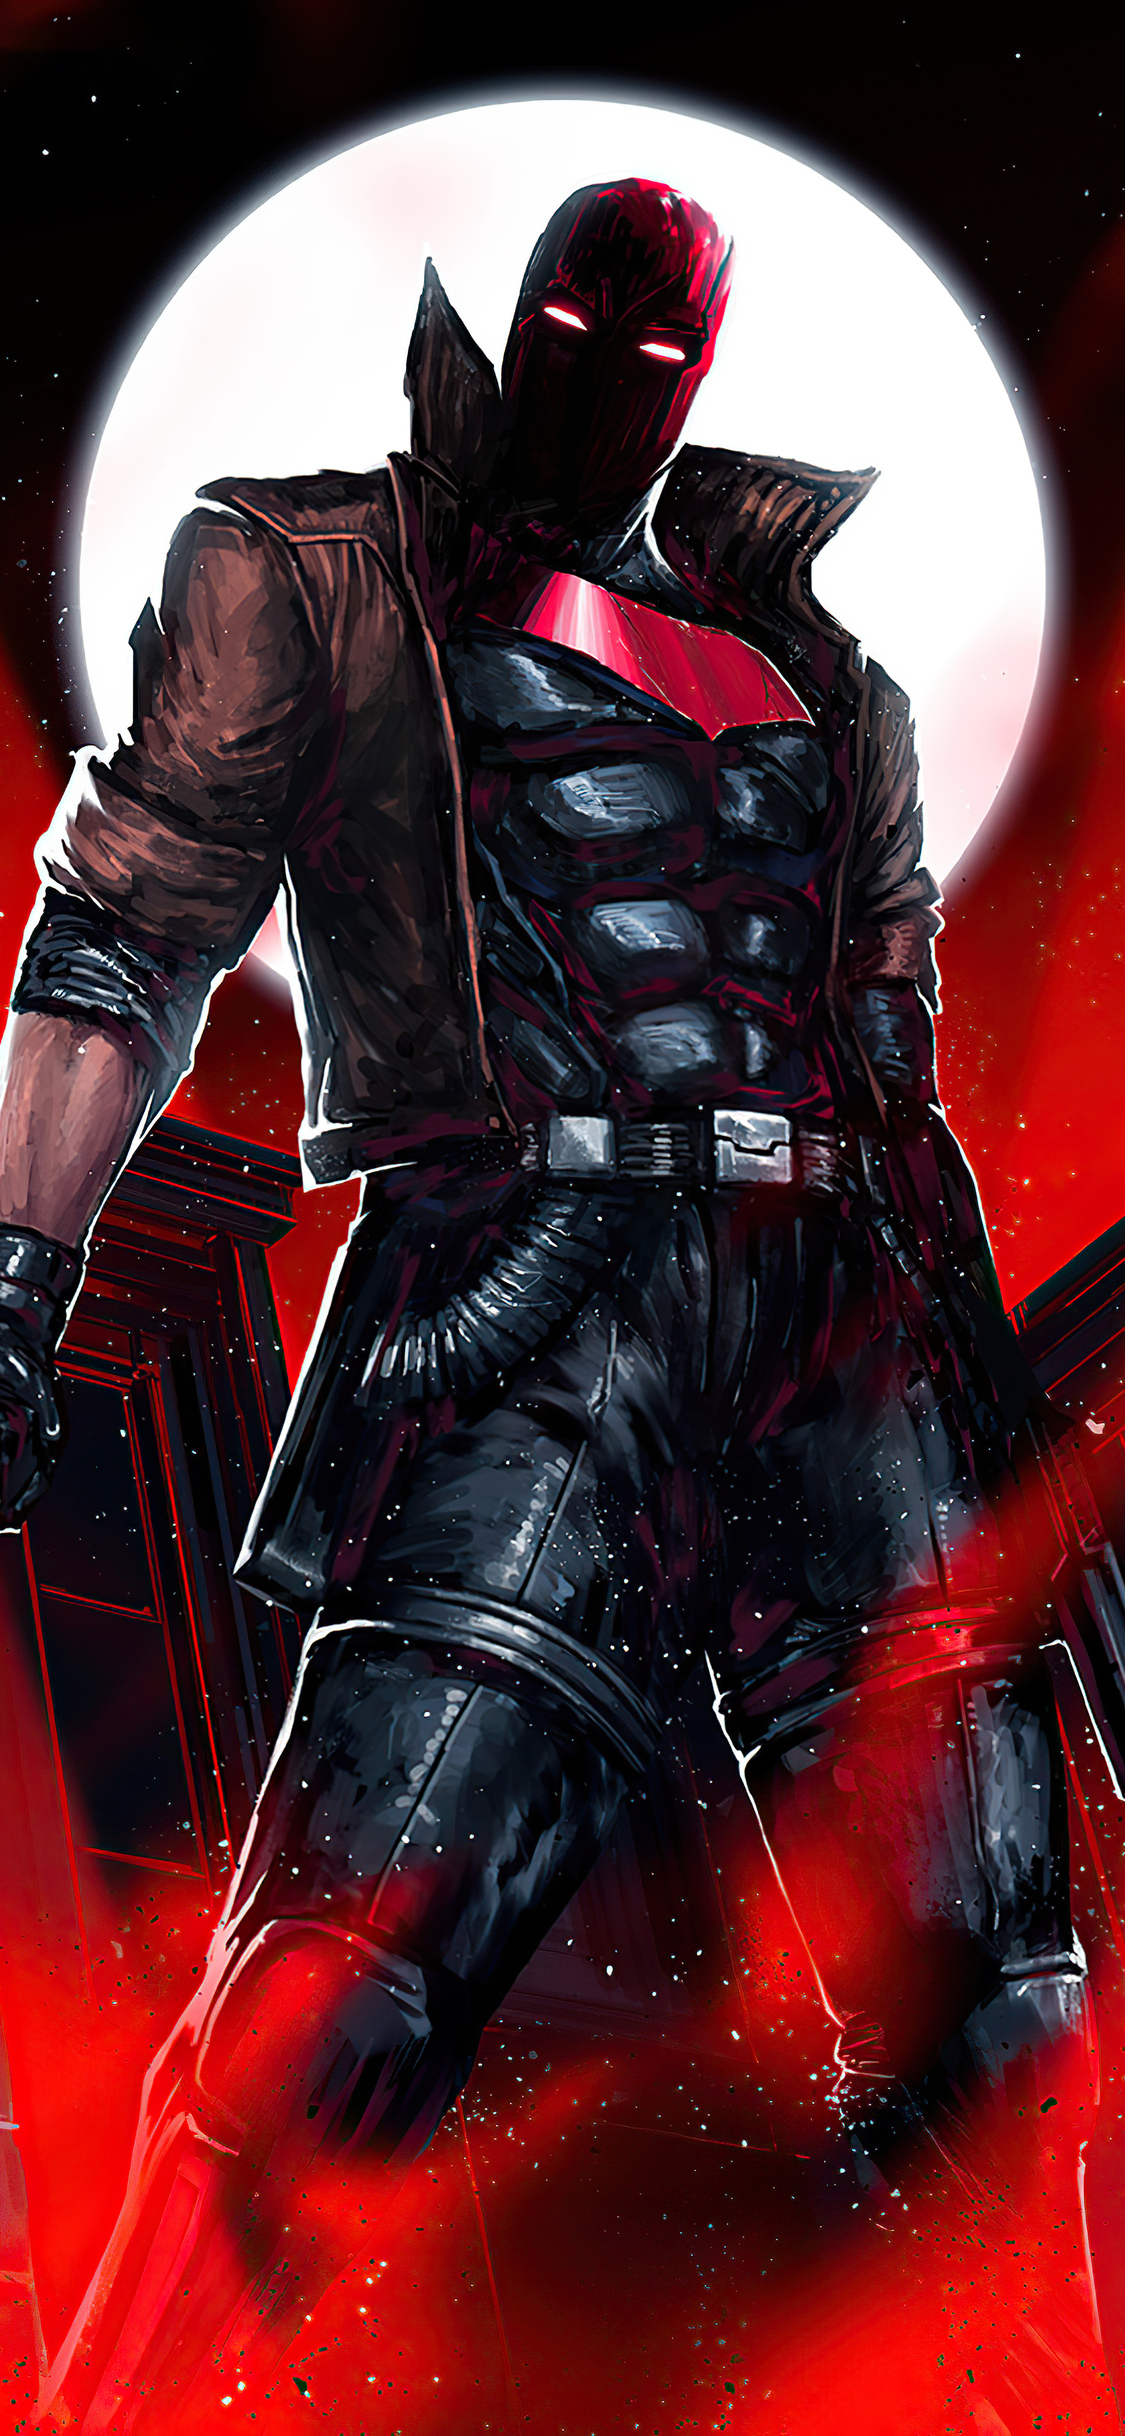 Red hood with two guns Wallpaper 4k Ultra HD ID8493